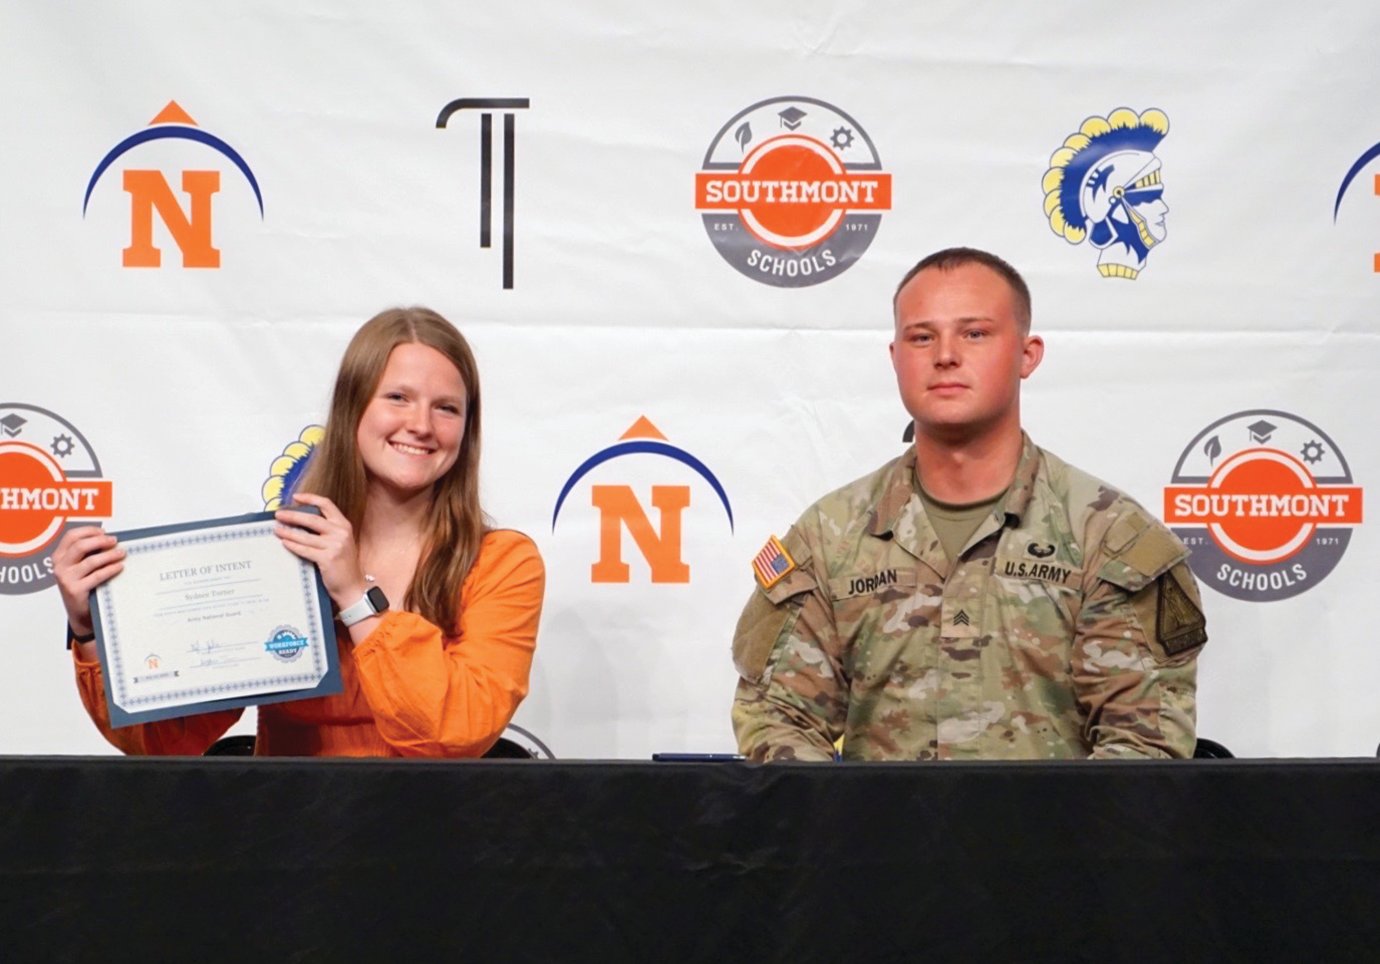 Sydnee Turner commits to the U.S. Army National Guard Tuesday at the Workforce Signing ceremony at North Montgomery High School alongside Sgt. Tyler Jordan.